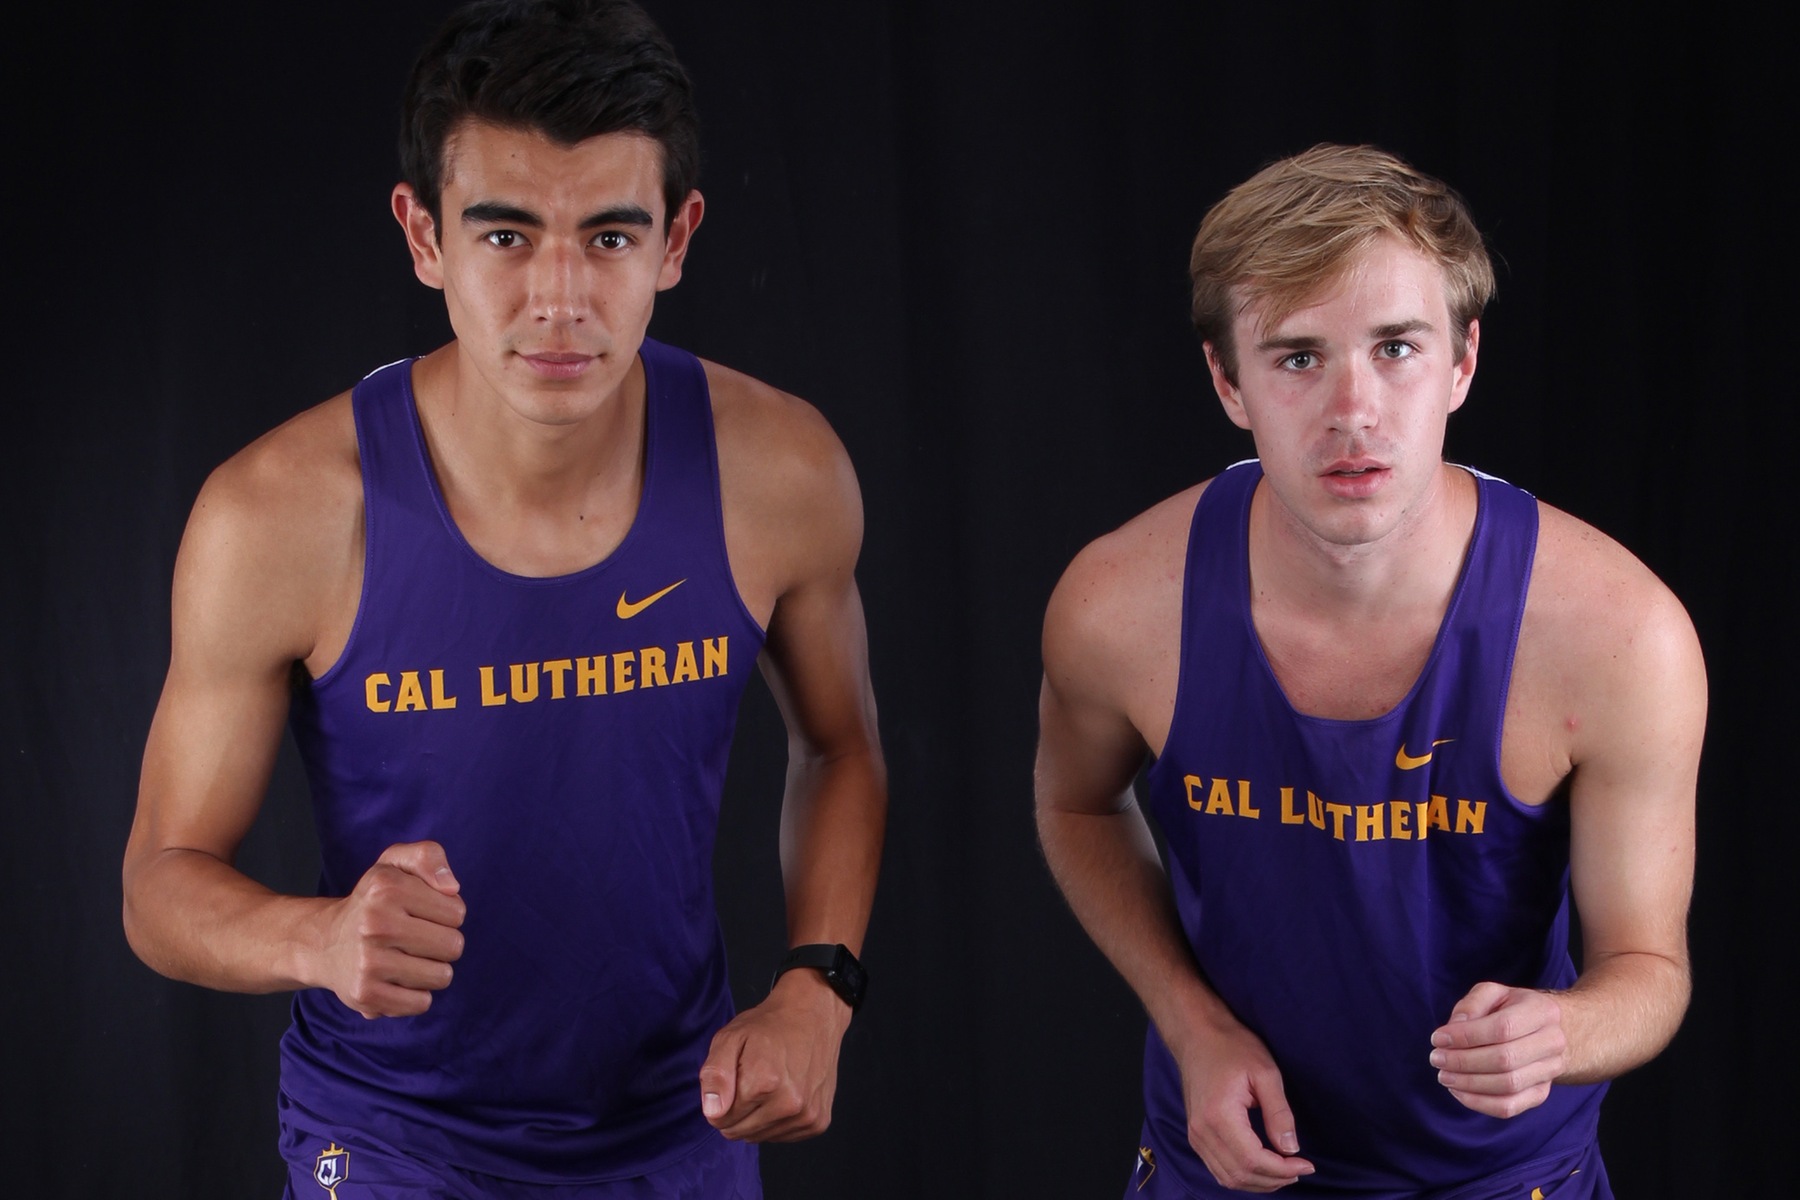 Baza Top Runner, Kingsmen Cross Country Finishes 18th